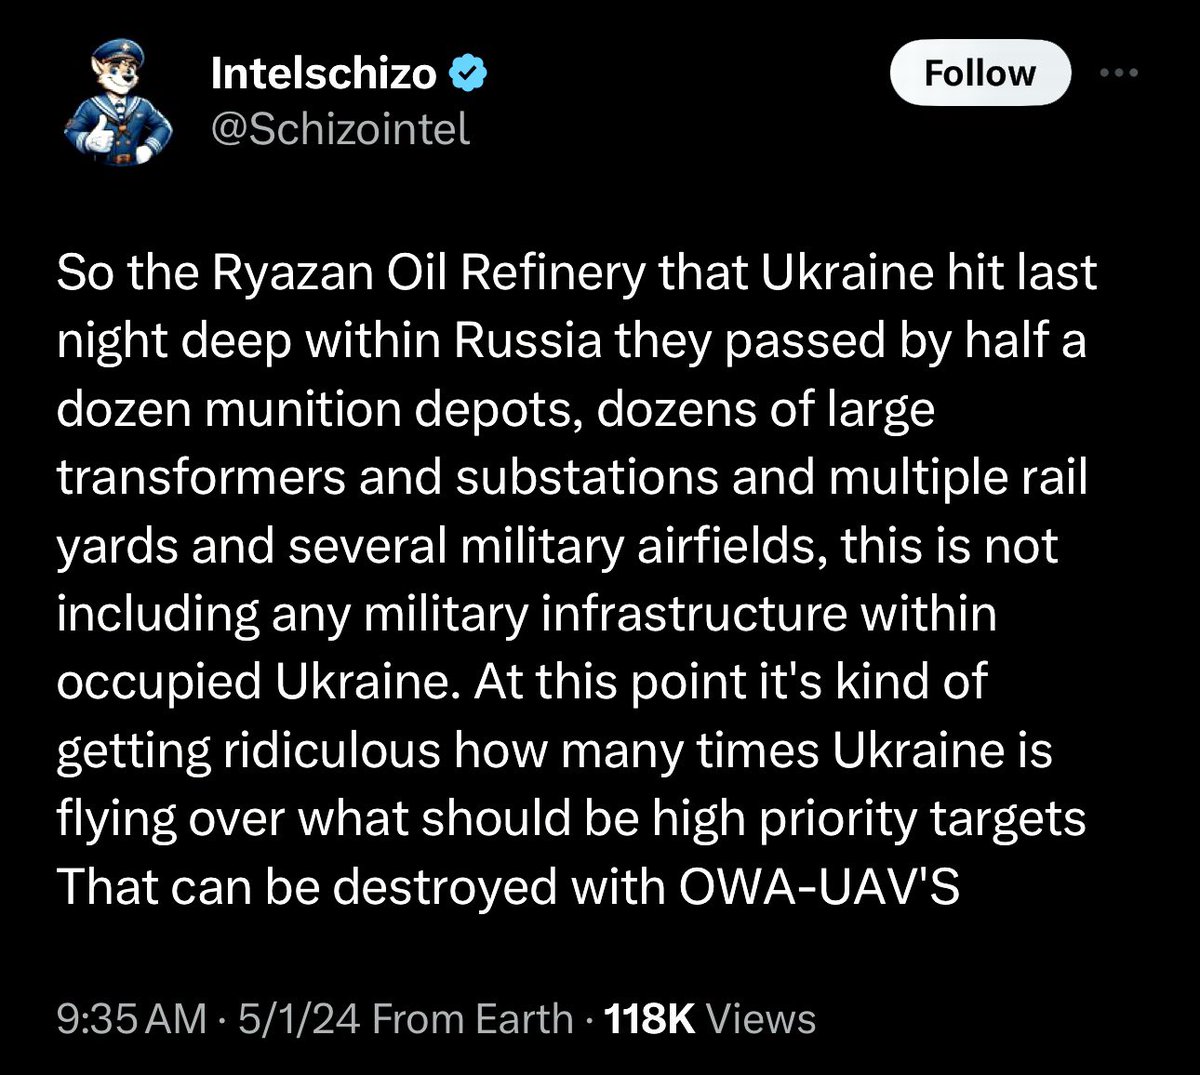 It is ridiculous how Ukraine ignores high-priority targets and attacks low priority targets in Russia, says an observer criticizing Ukrainian attack on Russian oil refinery in Ryazan Let’s take this argument seriously and think about what Ru targets should Ukraine hit first 1/